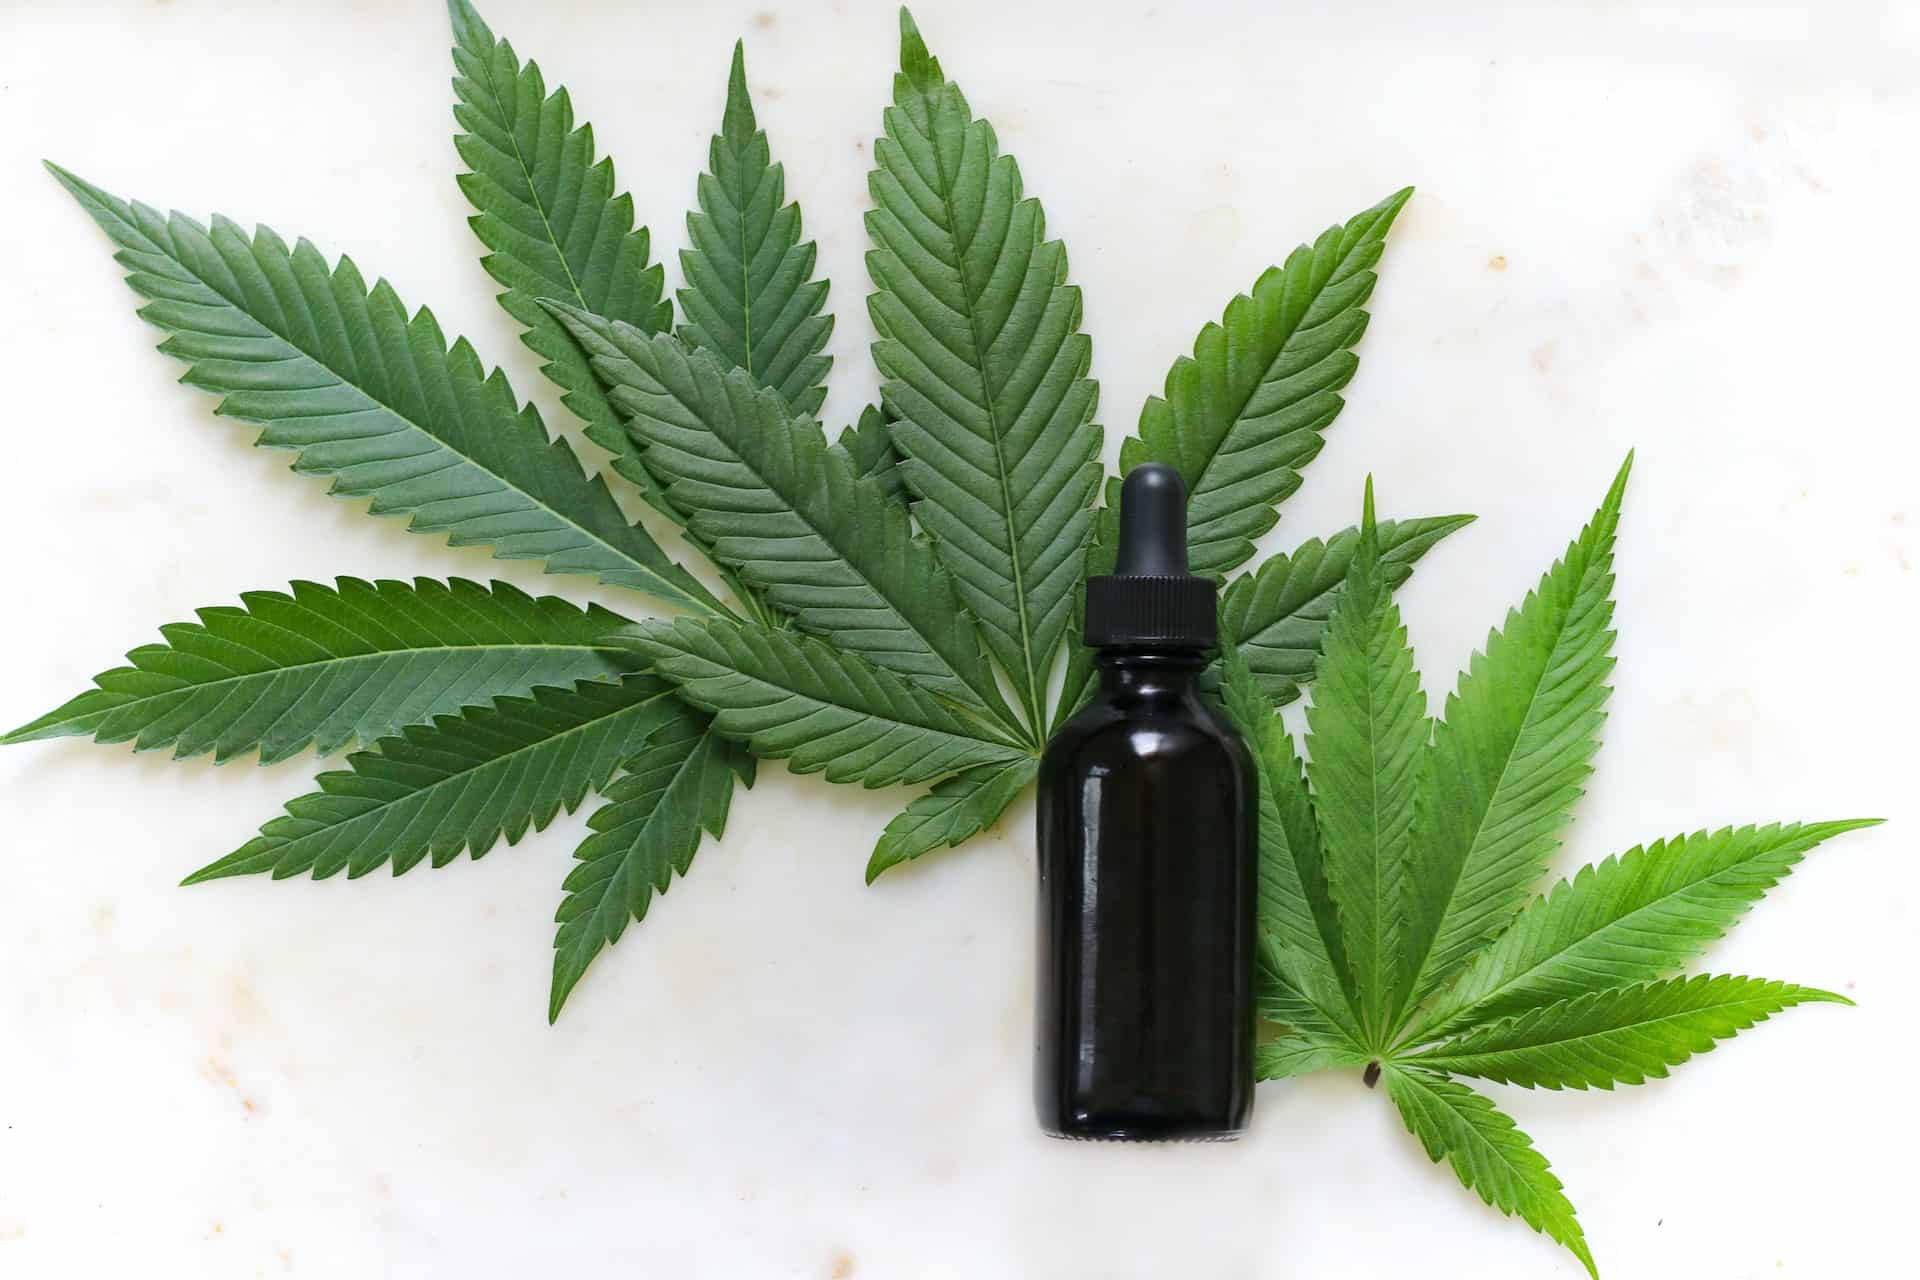 Can CBD oil really help with anxiety?